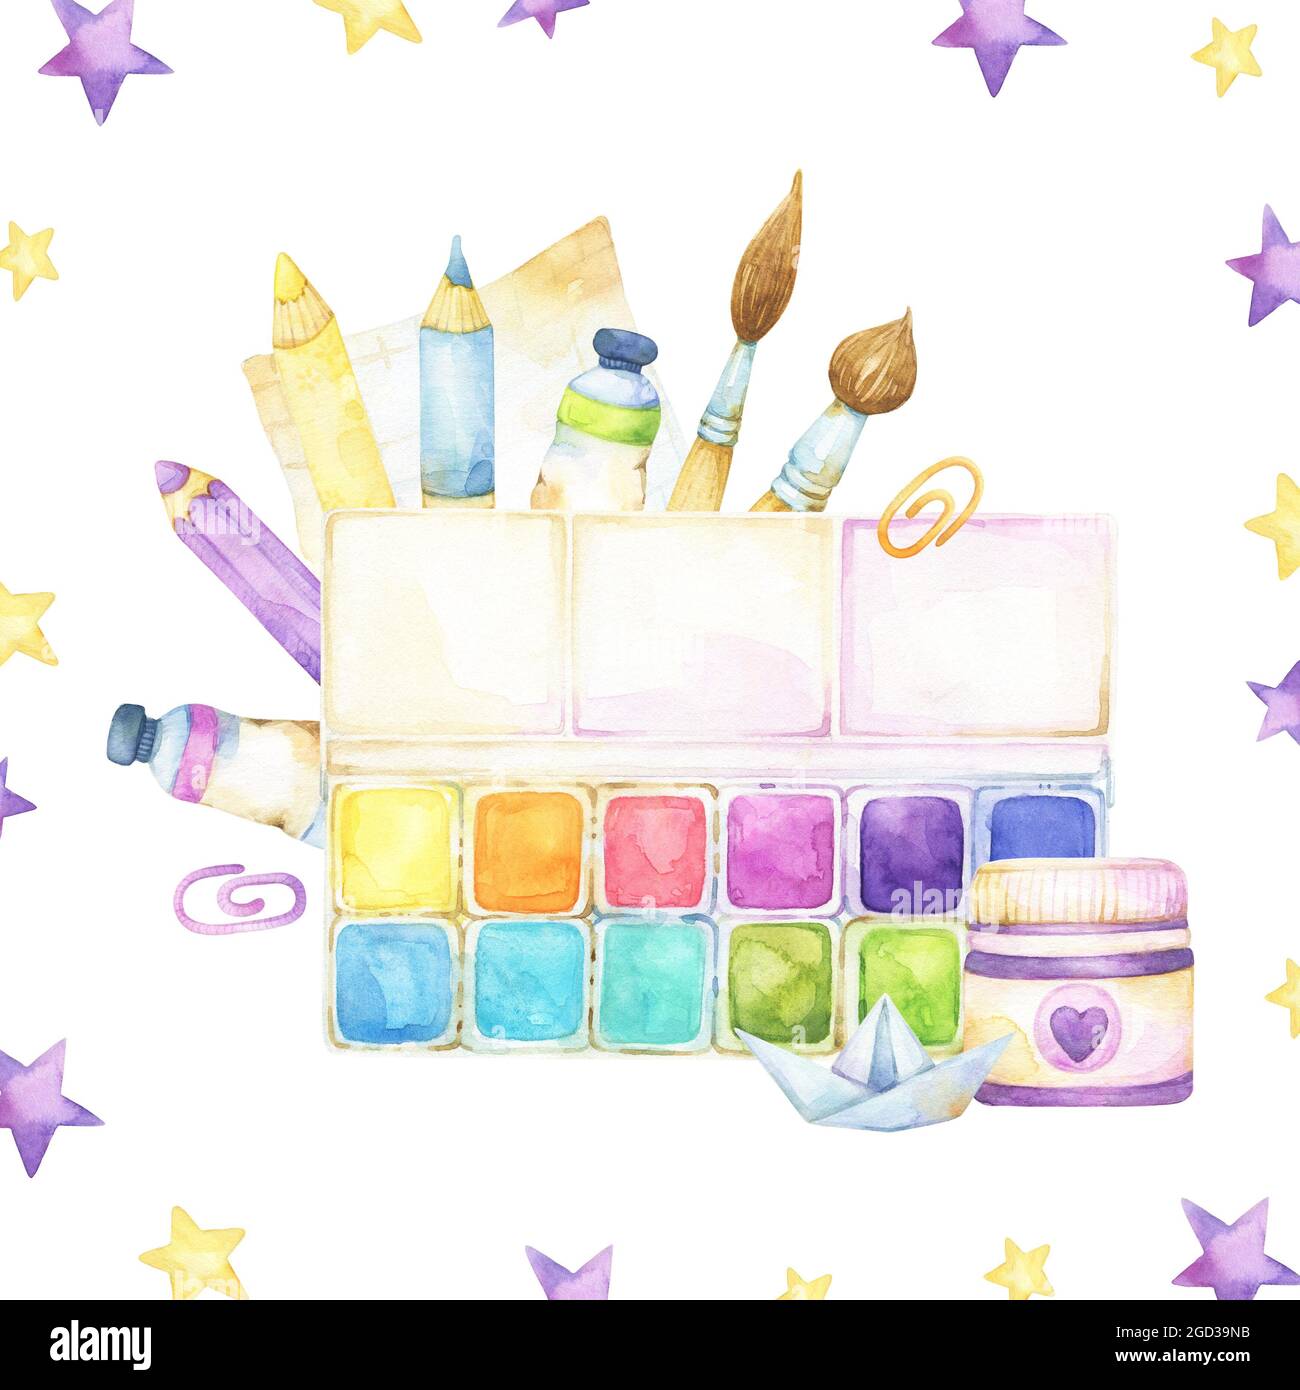 https://c8.alamy.com/comp/2GD39NB/square-template-with-art-supplies-watercolor-illustration-isolated-on-white-background-including-back-to-school-items-for-craft-and-painting-station-2GD39NB.jpg